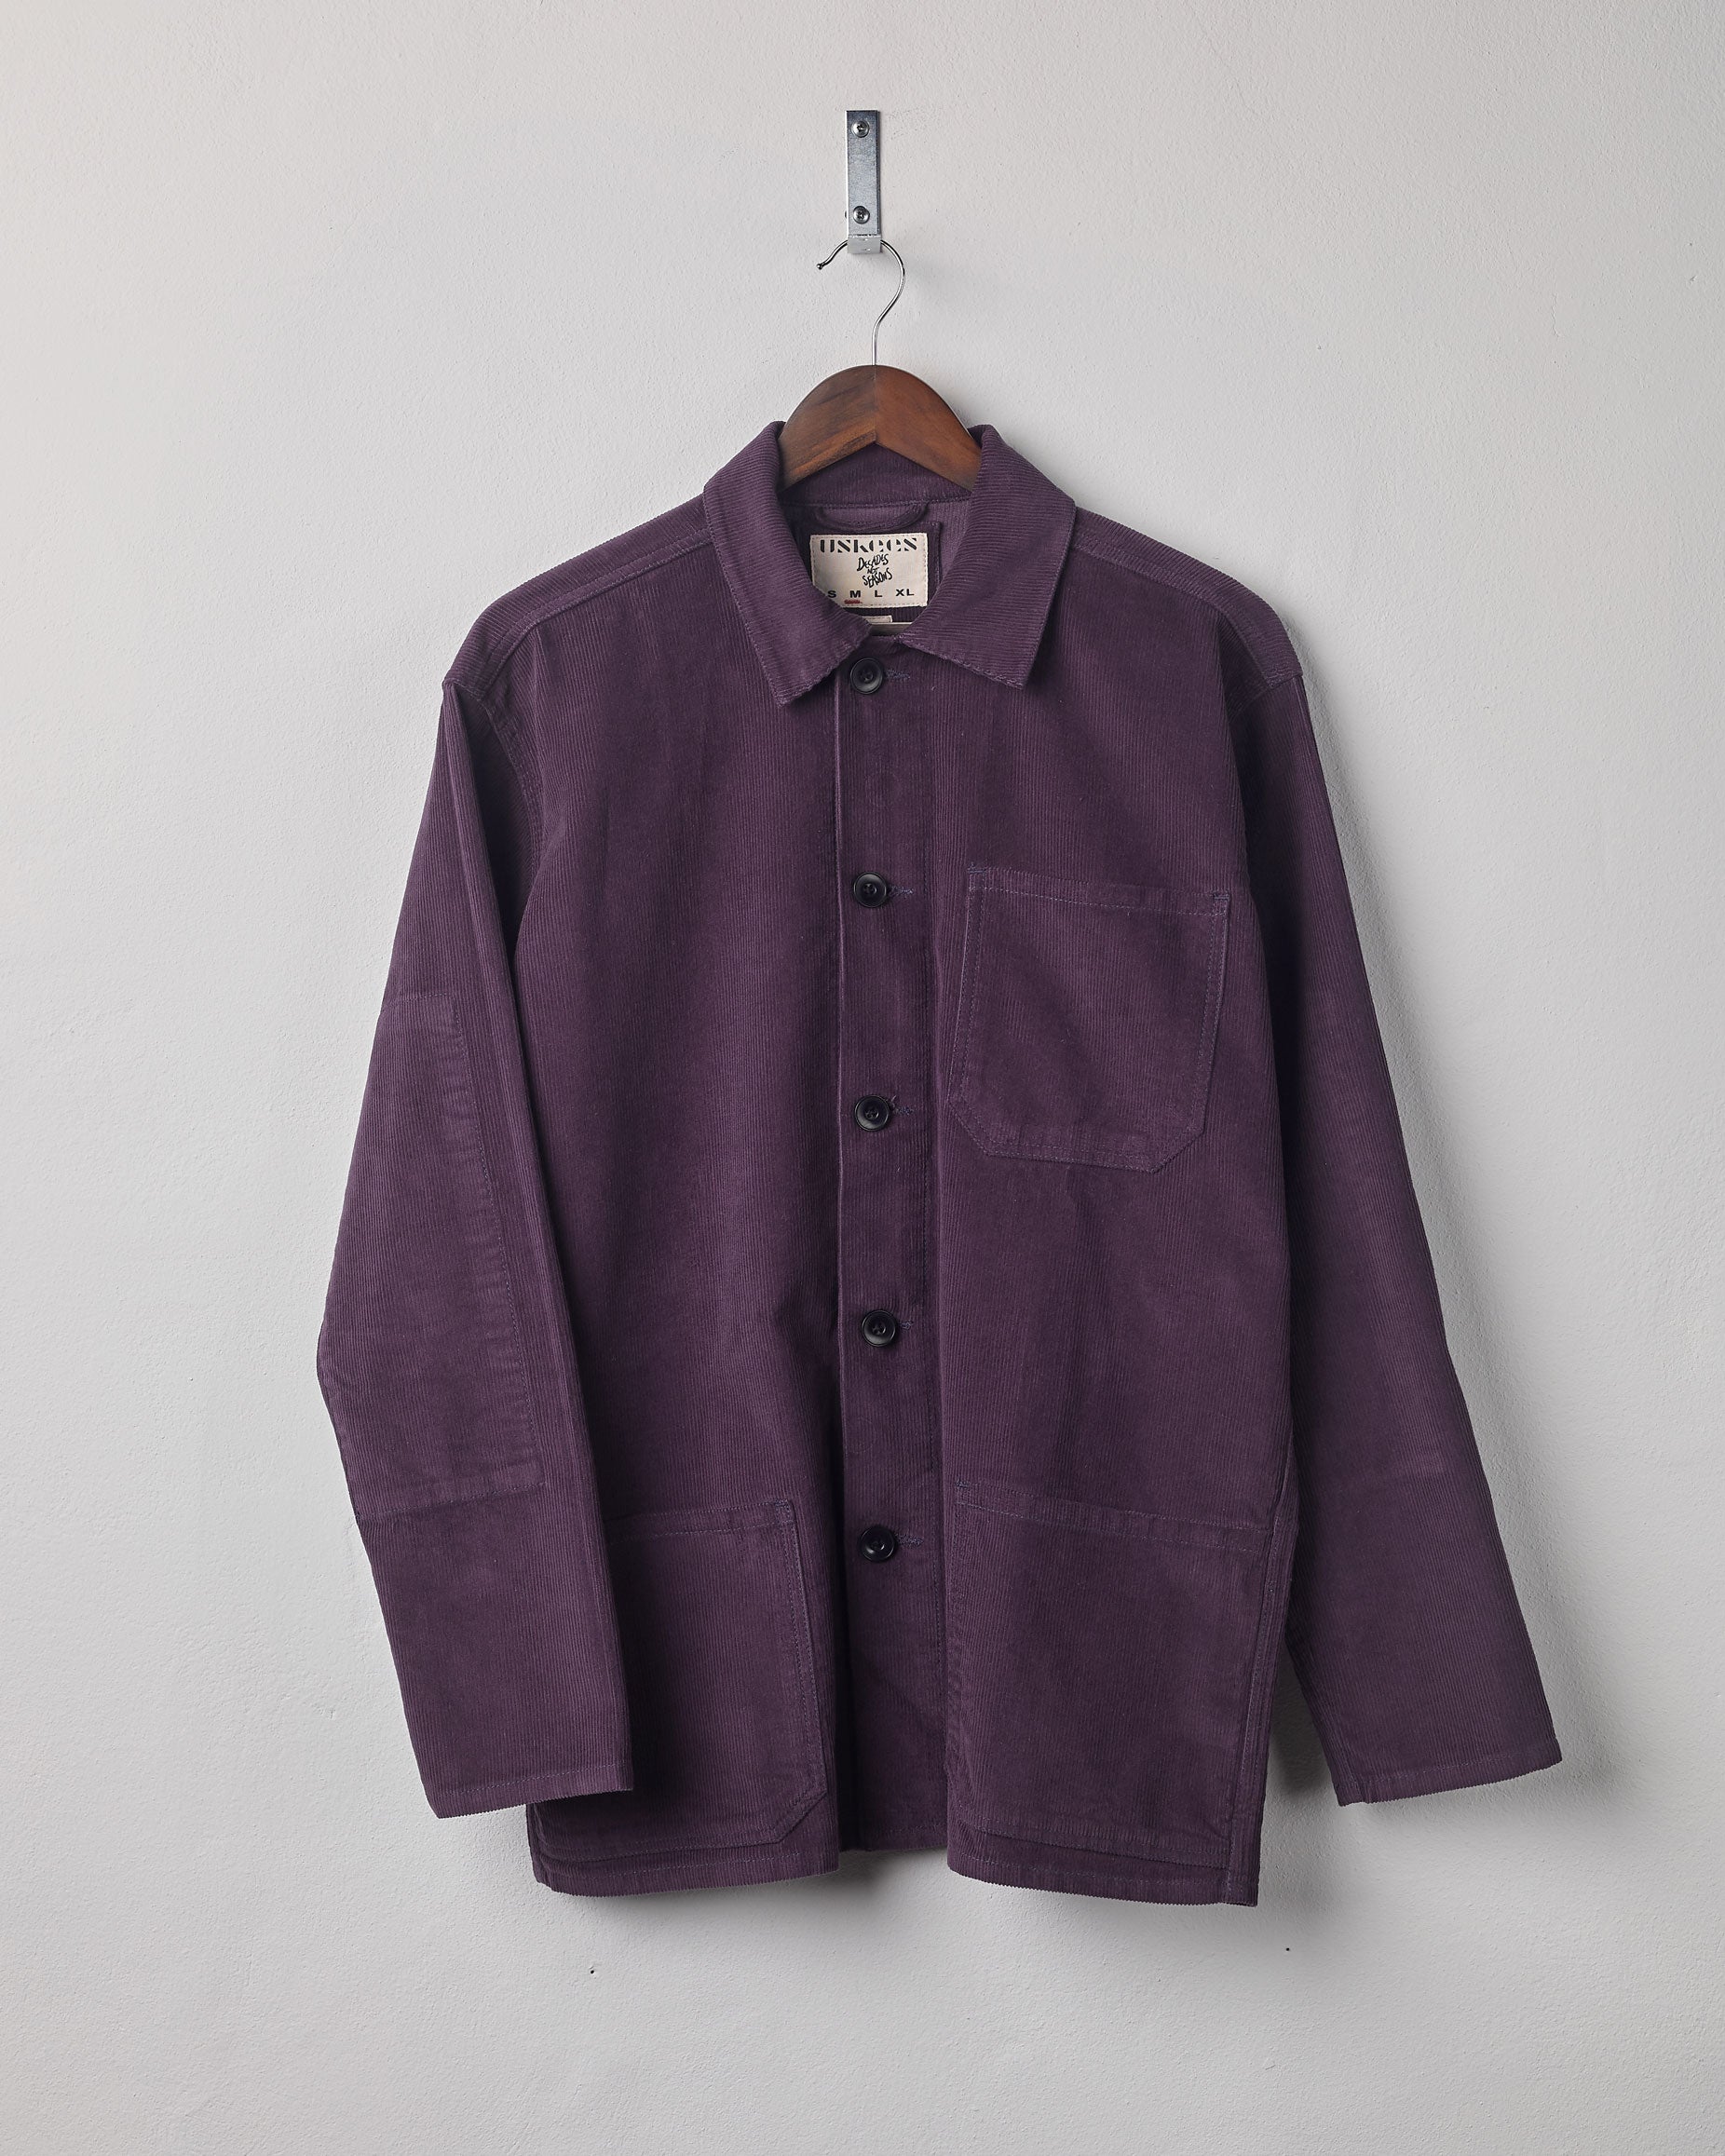 Plum coloured, buttoned corduroy overshirt from Uskees presented on hanger. Clear view of breast and hip pocket and corozo buttons.